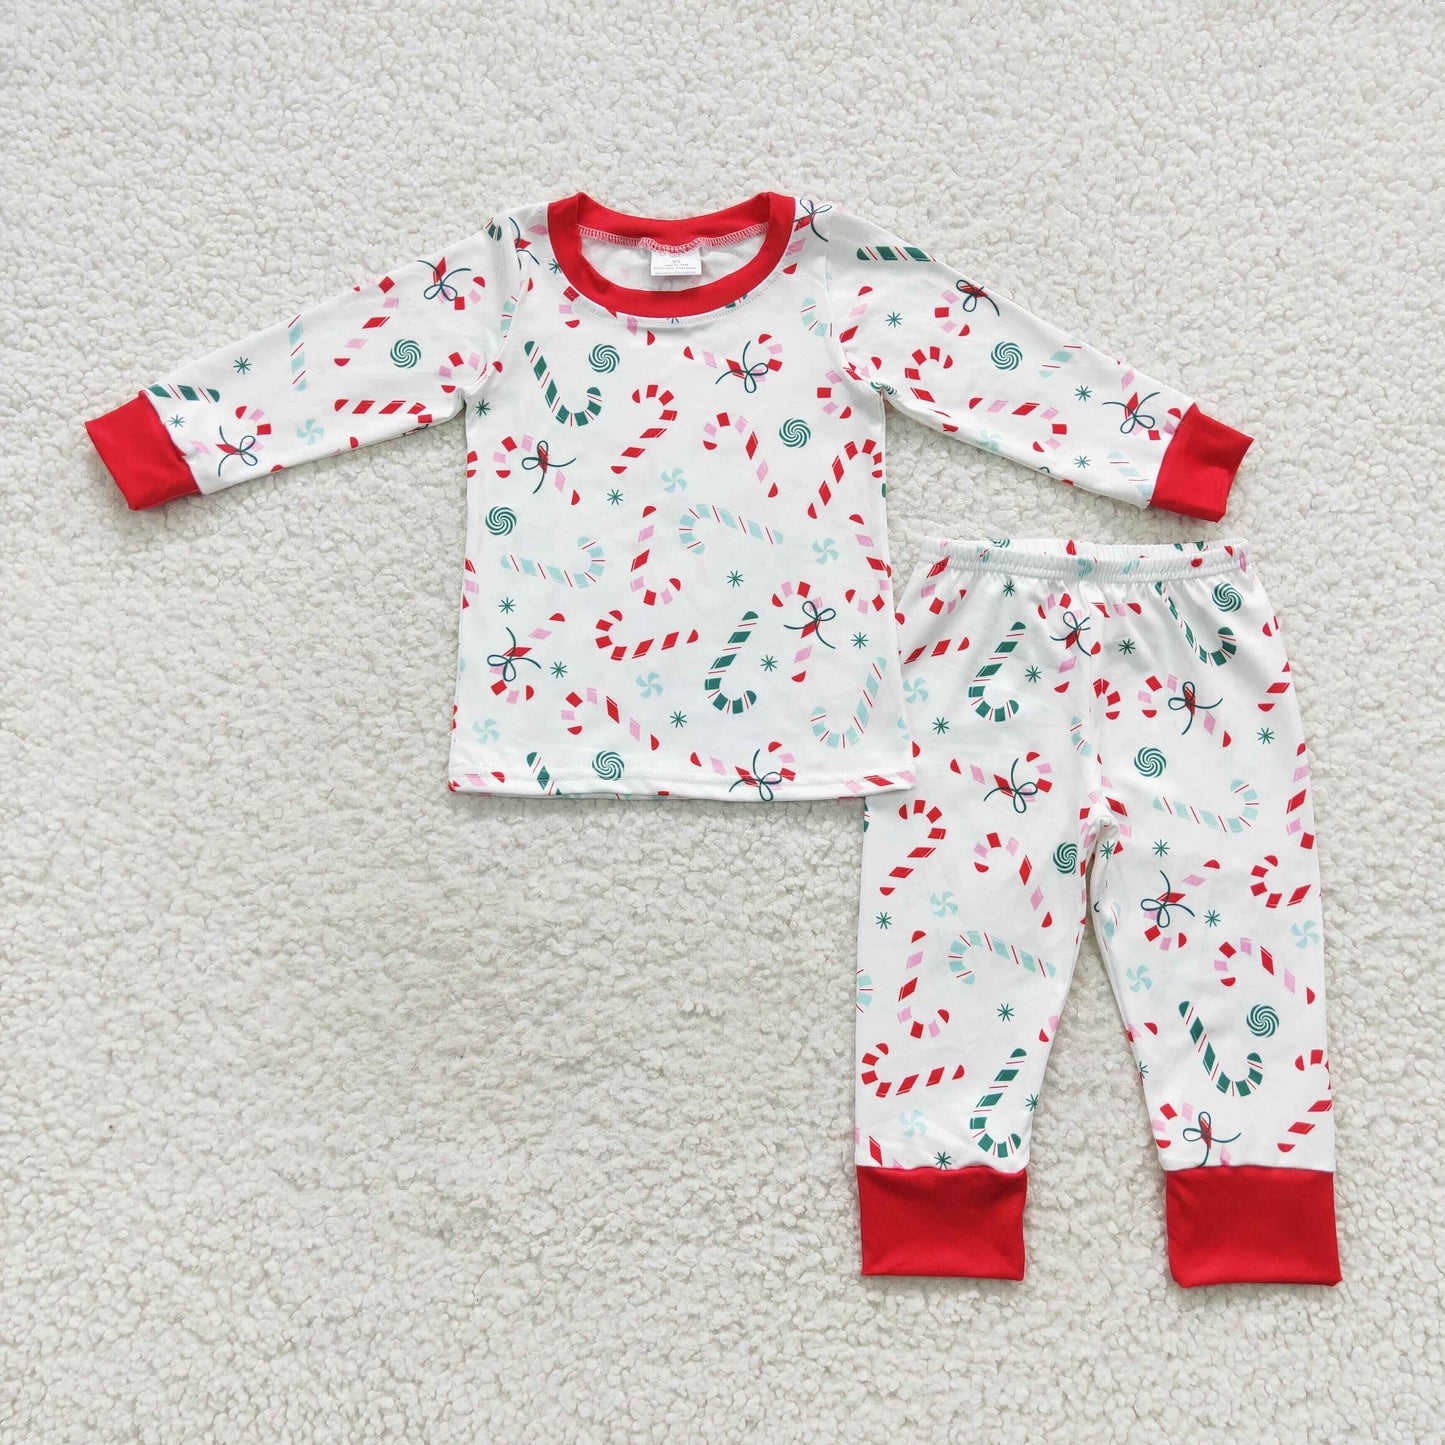 Christmas boy candy cane holiday clothes set